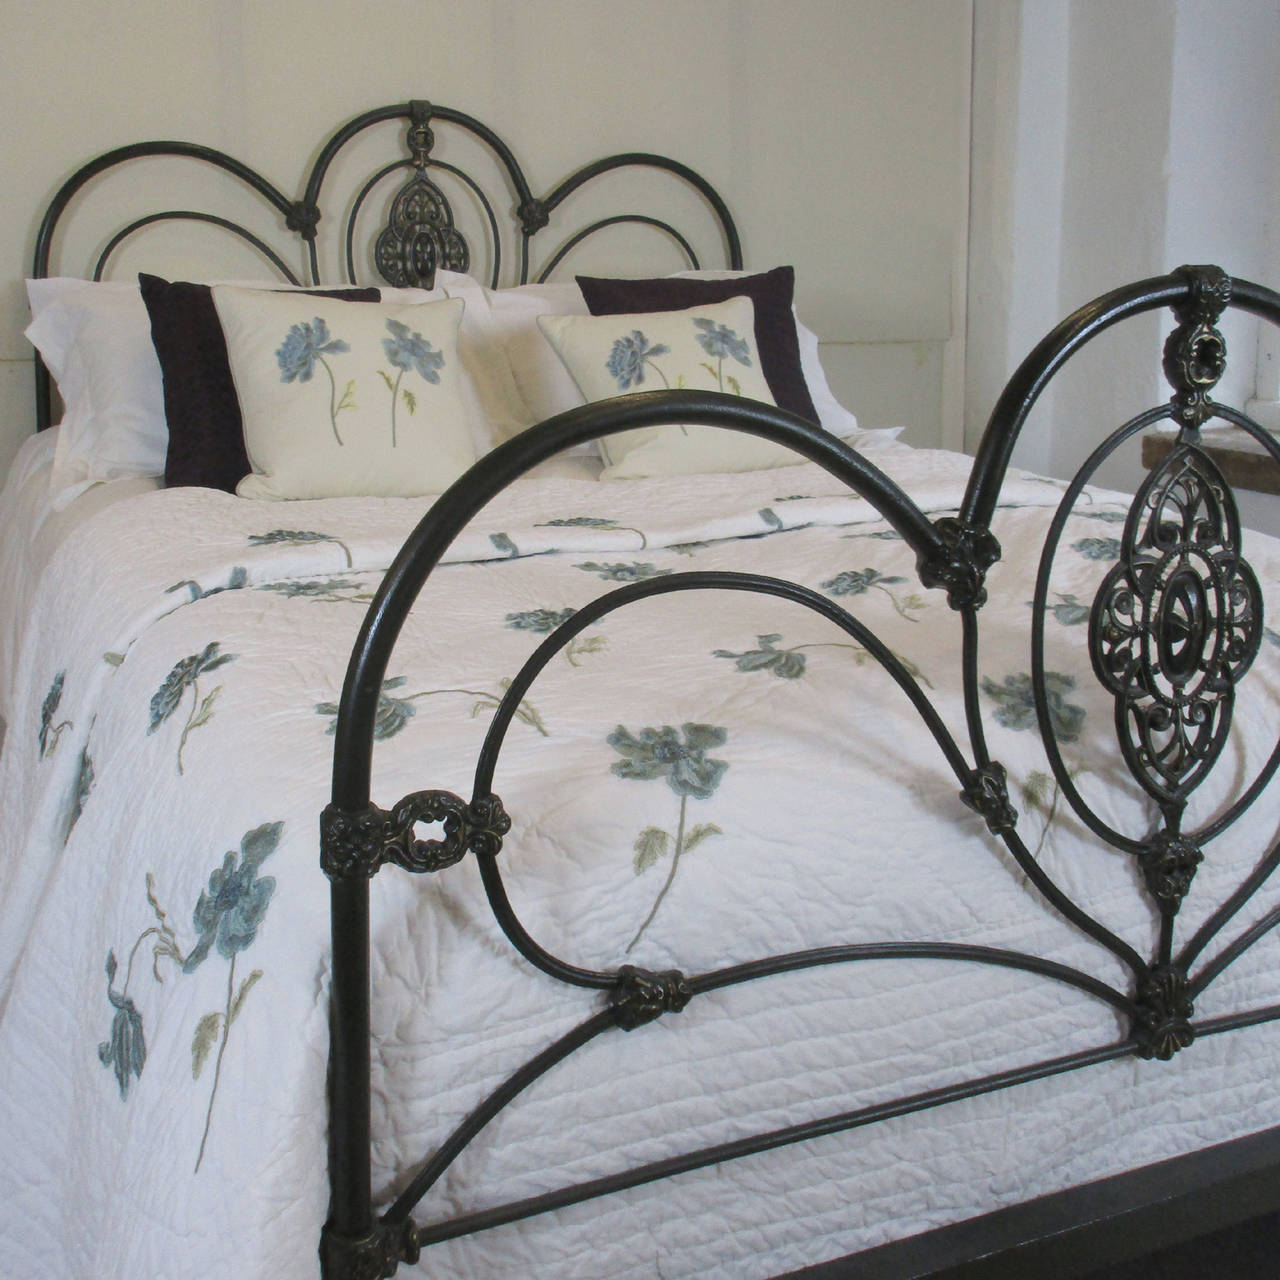 An attractive cast iron bedstead with gold lining decoration on the decorative castings.

This bed accepts a 60 in wide (5 ft or 150 cm) mattress and bed base set, which is British King Size or American Queen Size.
The price is for the bedstead